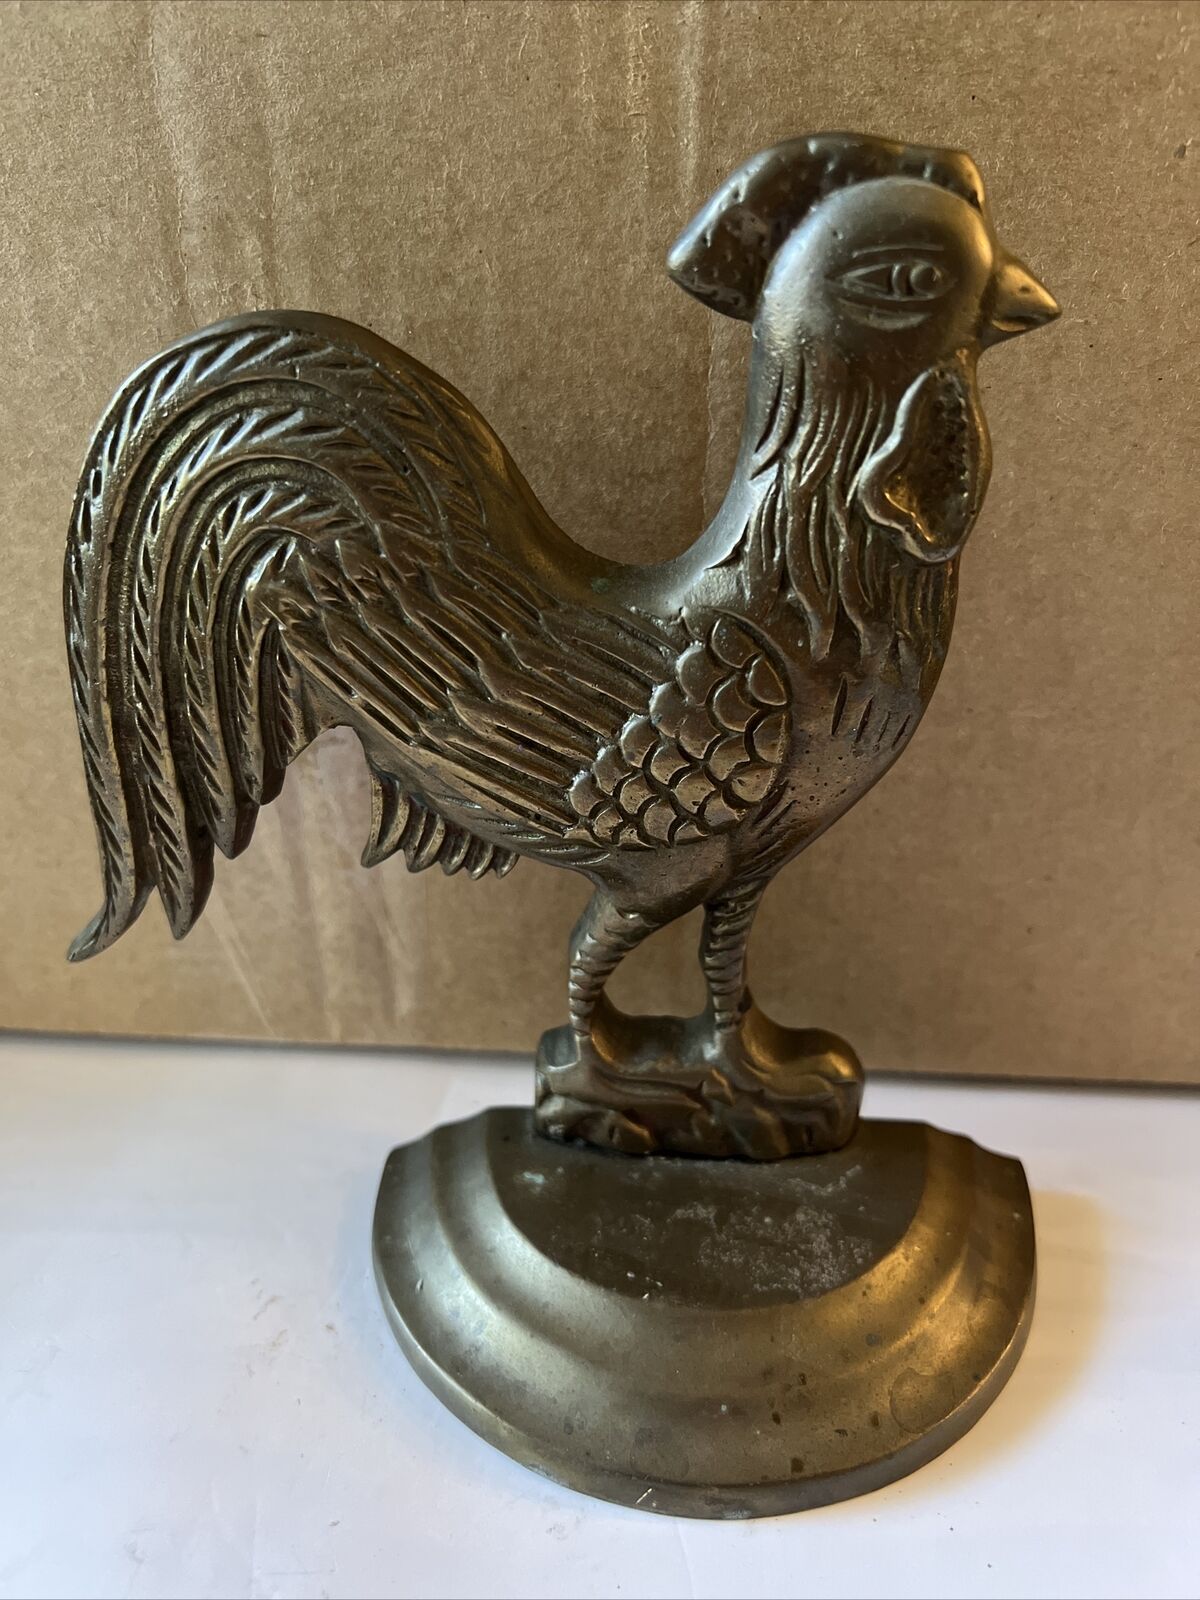 Vintage Genuine Solid Brass Rooster Bookend, Kelex-India